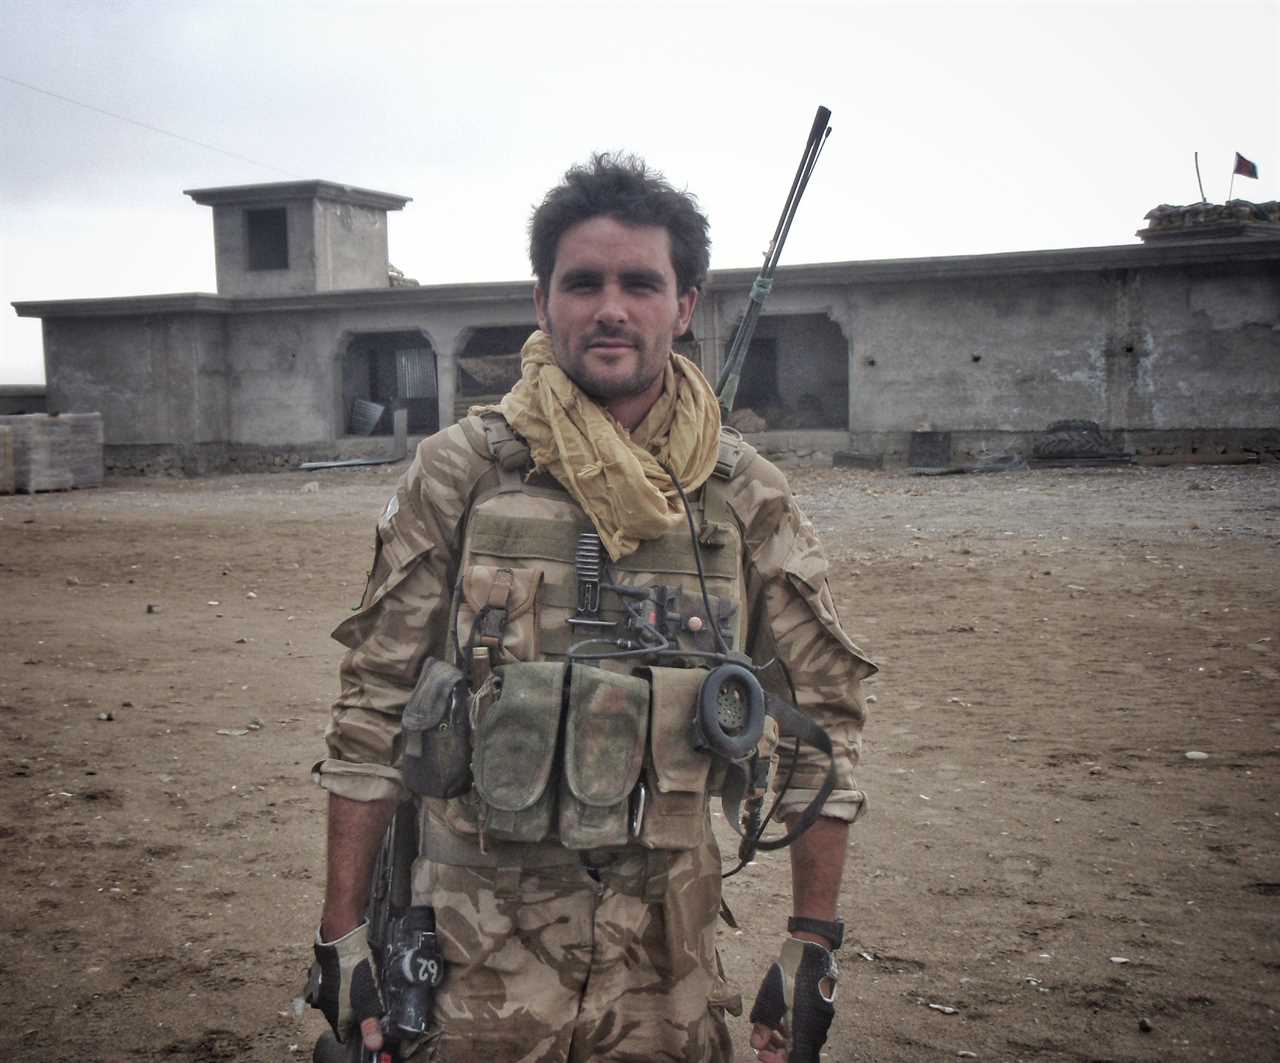 My TV shows see me cheat death – but I’m not ready to give that up to be with a woman, says Levison Wood